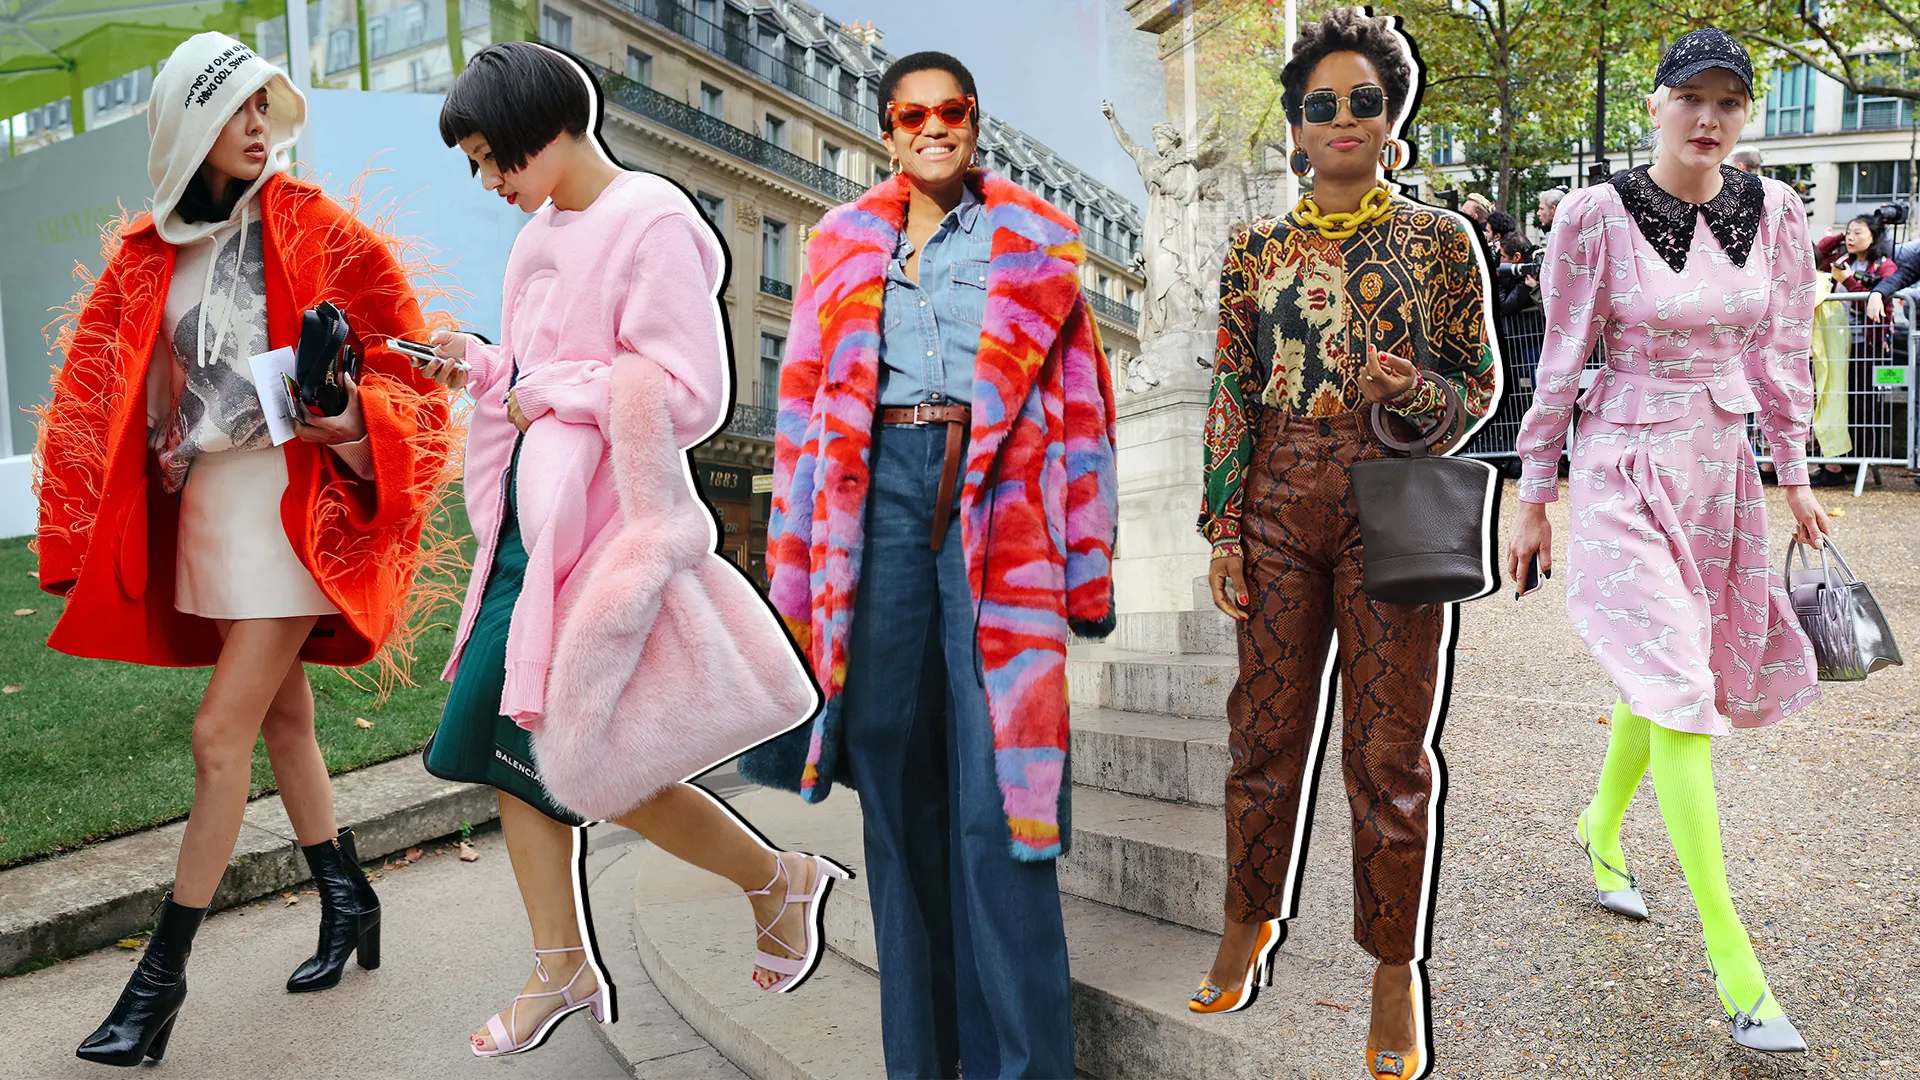 5 Eye-Catching Fashion Trends to Try This Season